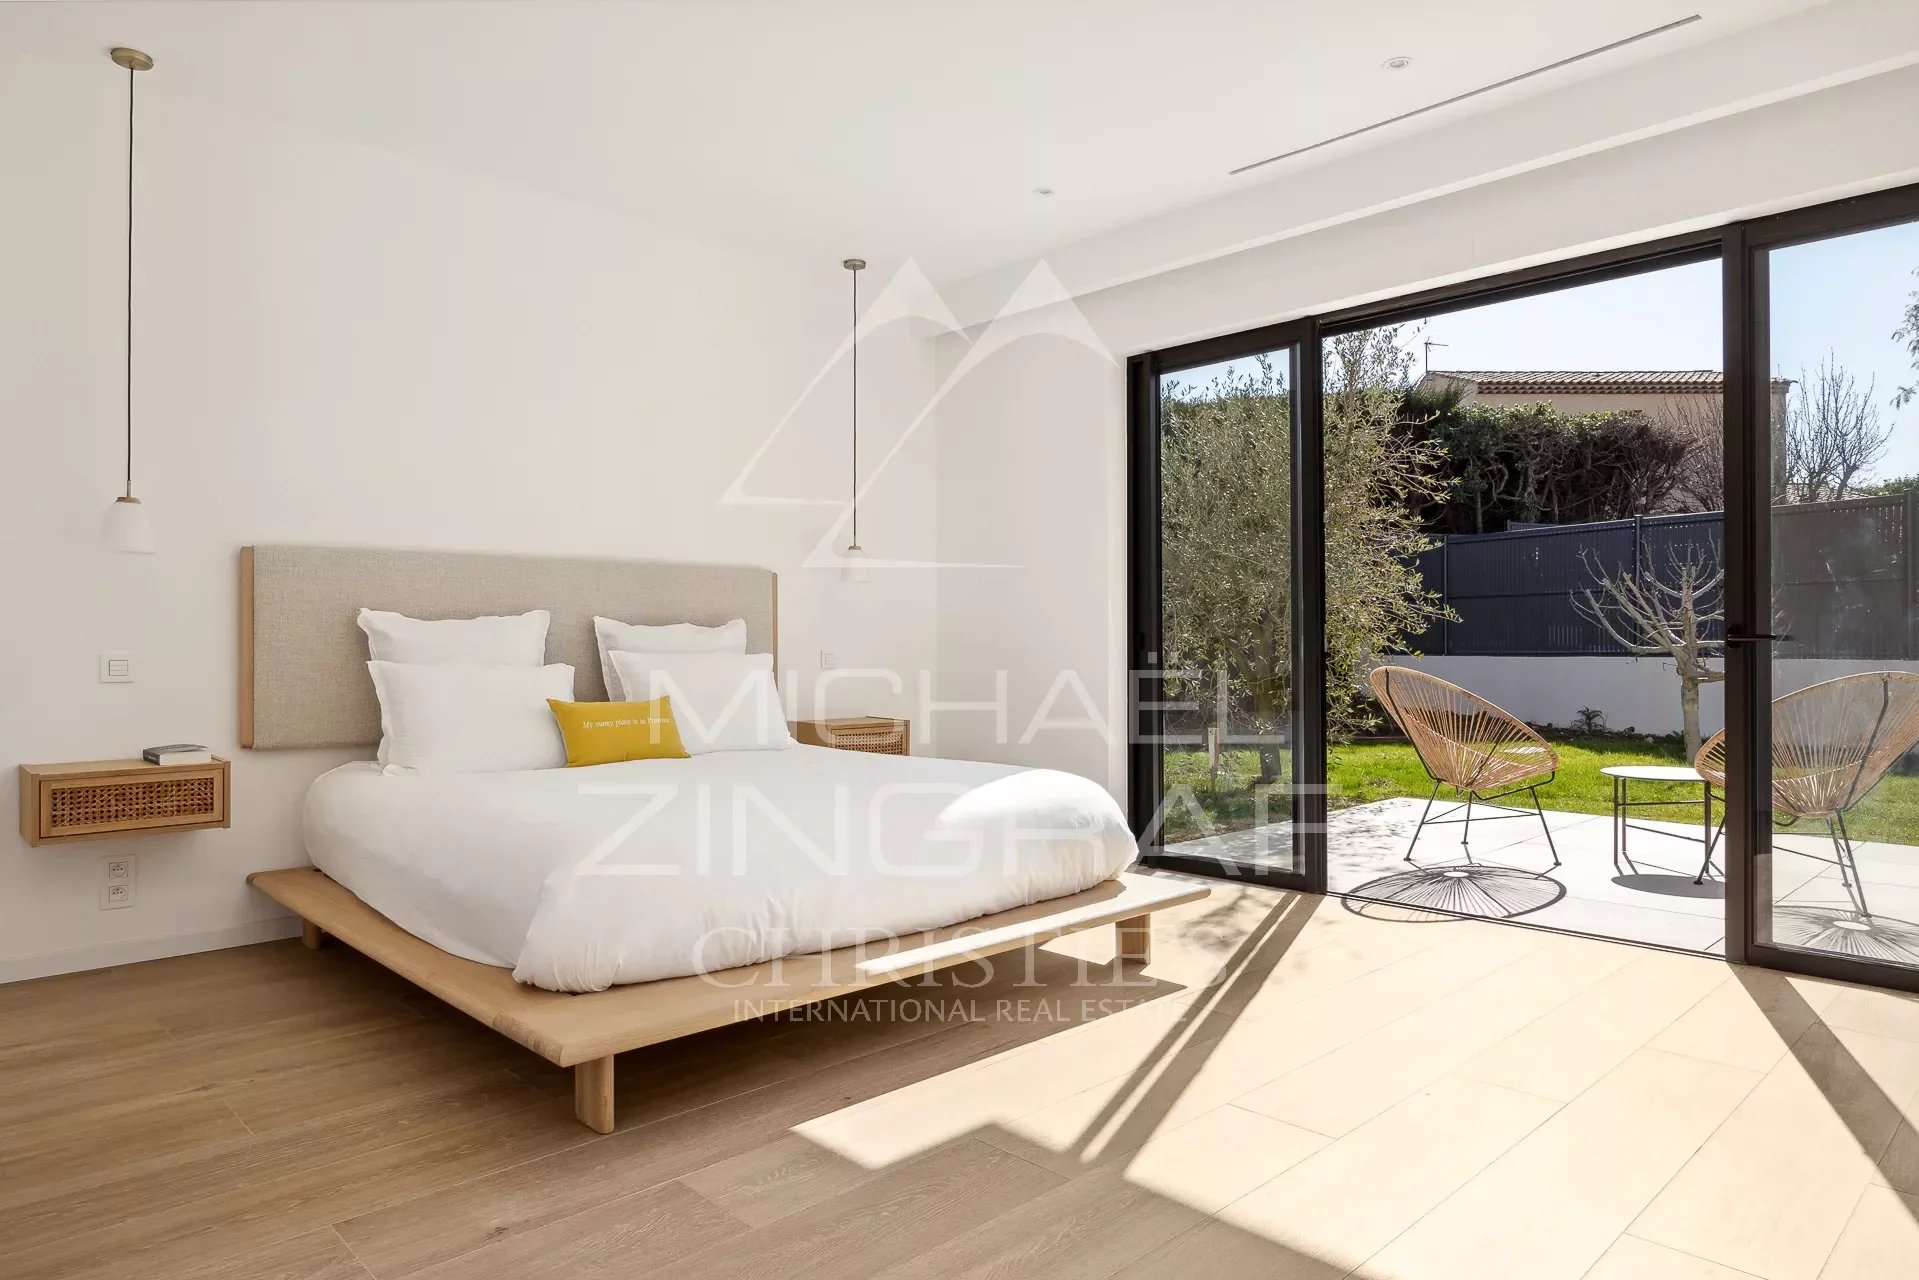 Mougins - close to the old village - Brand new contemporary villa - 5 bedrooms